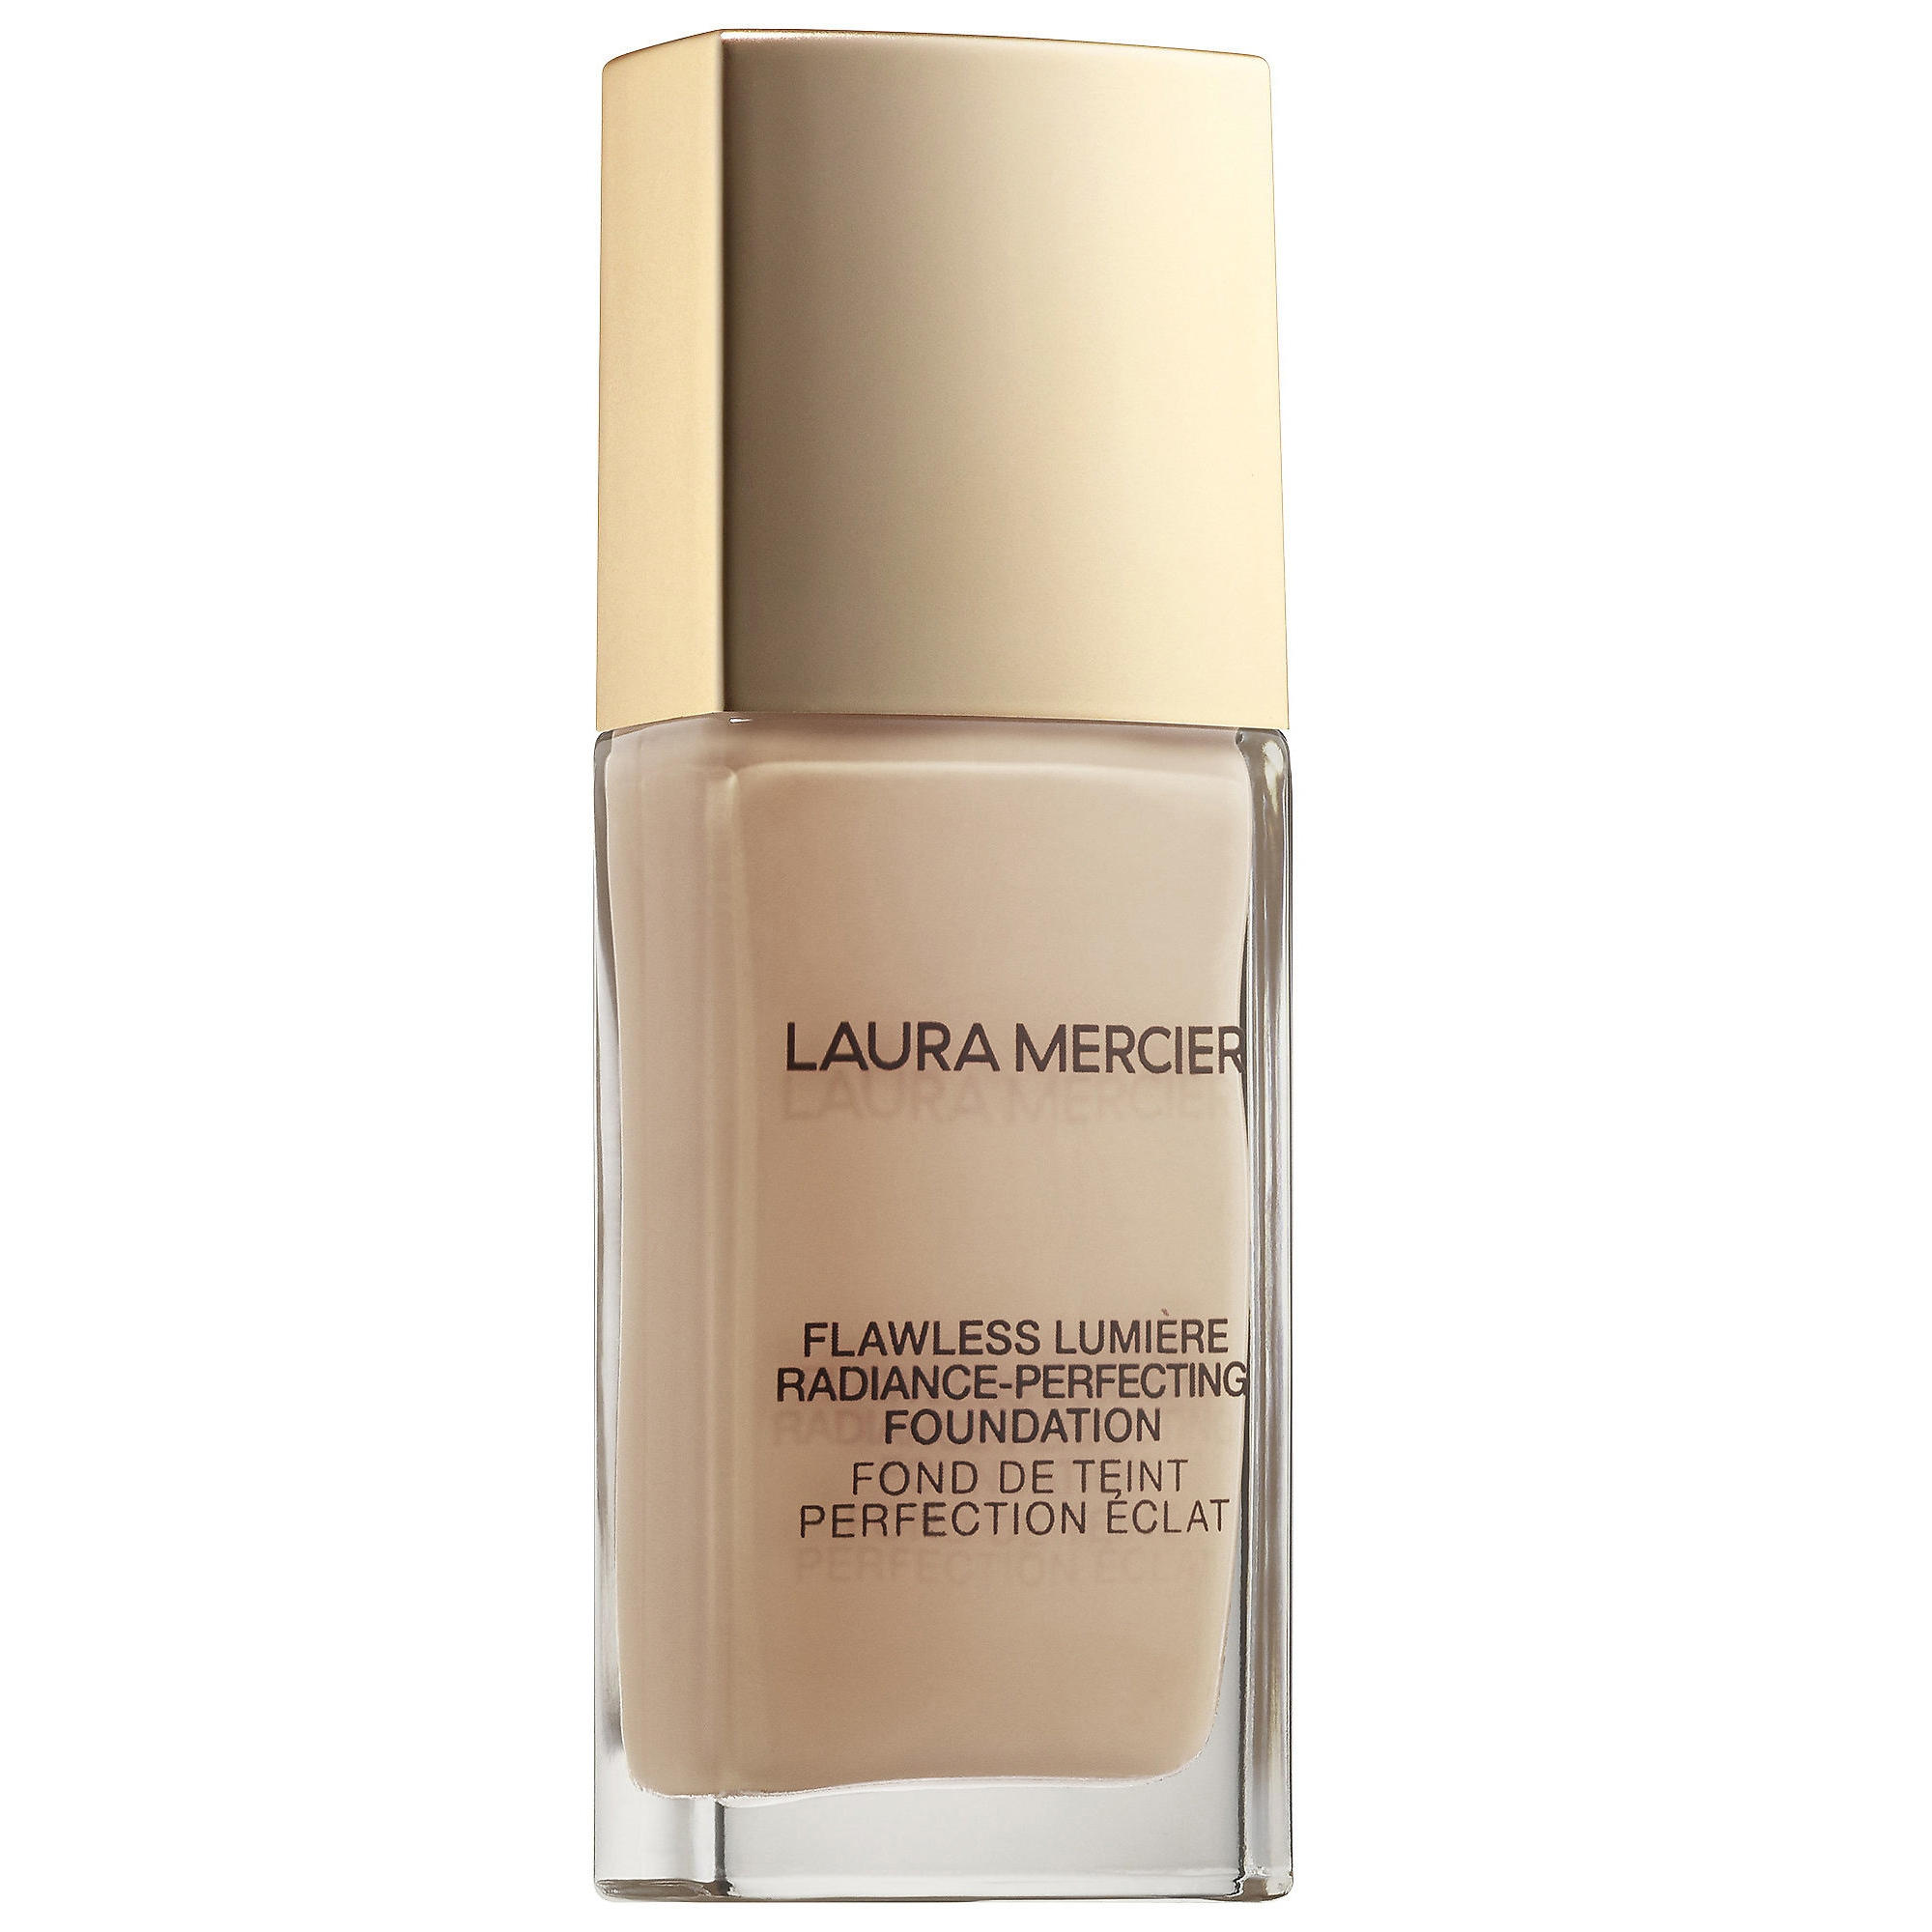 Laura Mercier Flawless Lumiere Radiance-Perfecting Foundation Creme 1N1